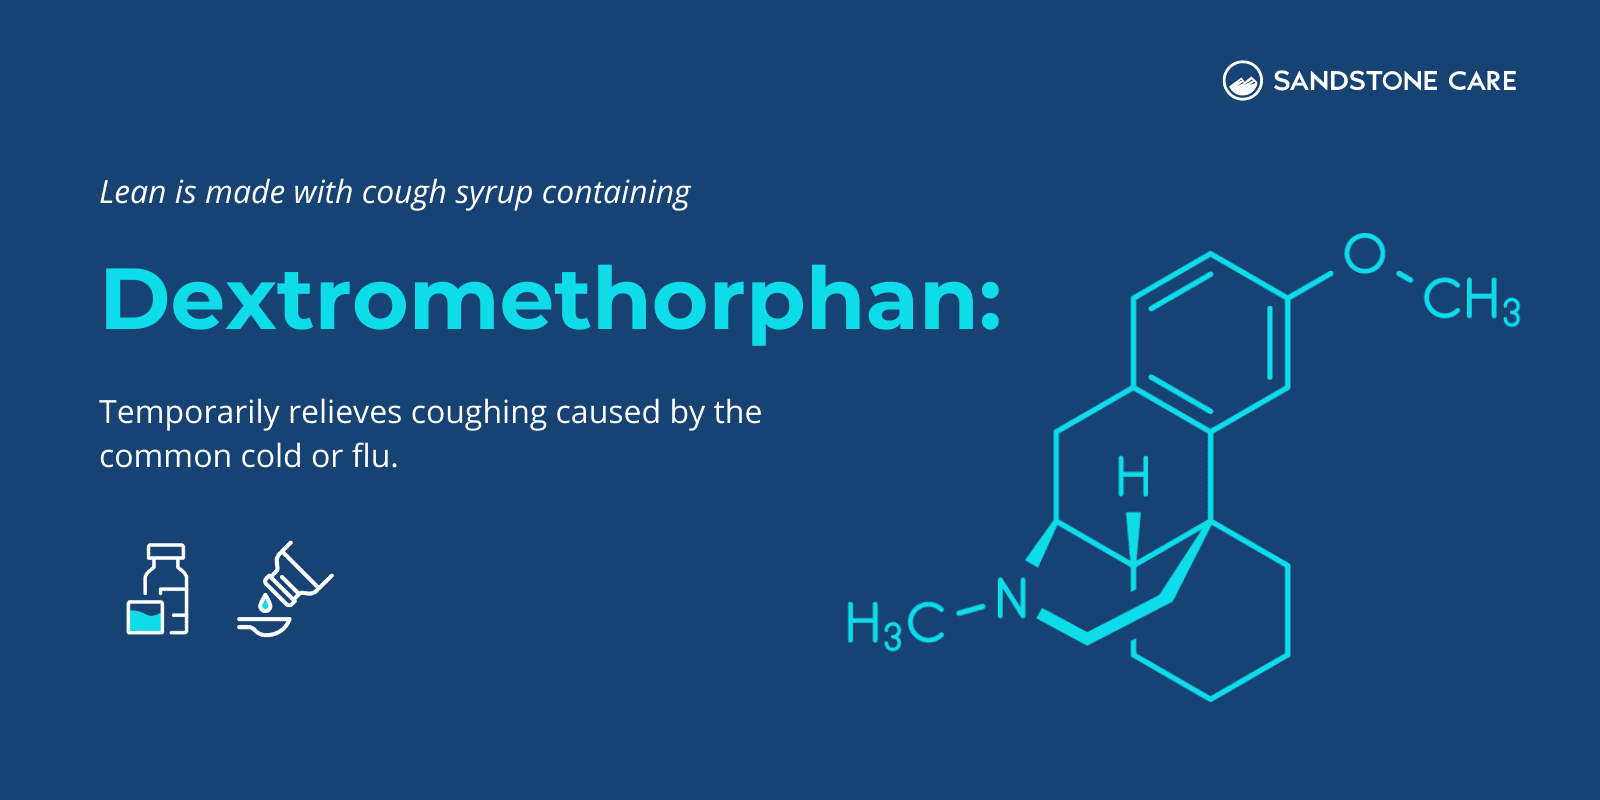 Dextromethorphan Definition explained next to the Dextromethorphan chemical compound graphic and relevant icons